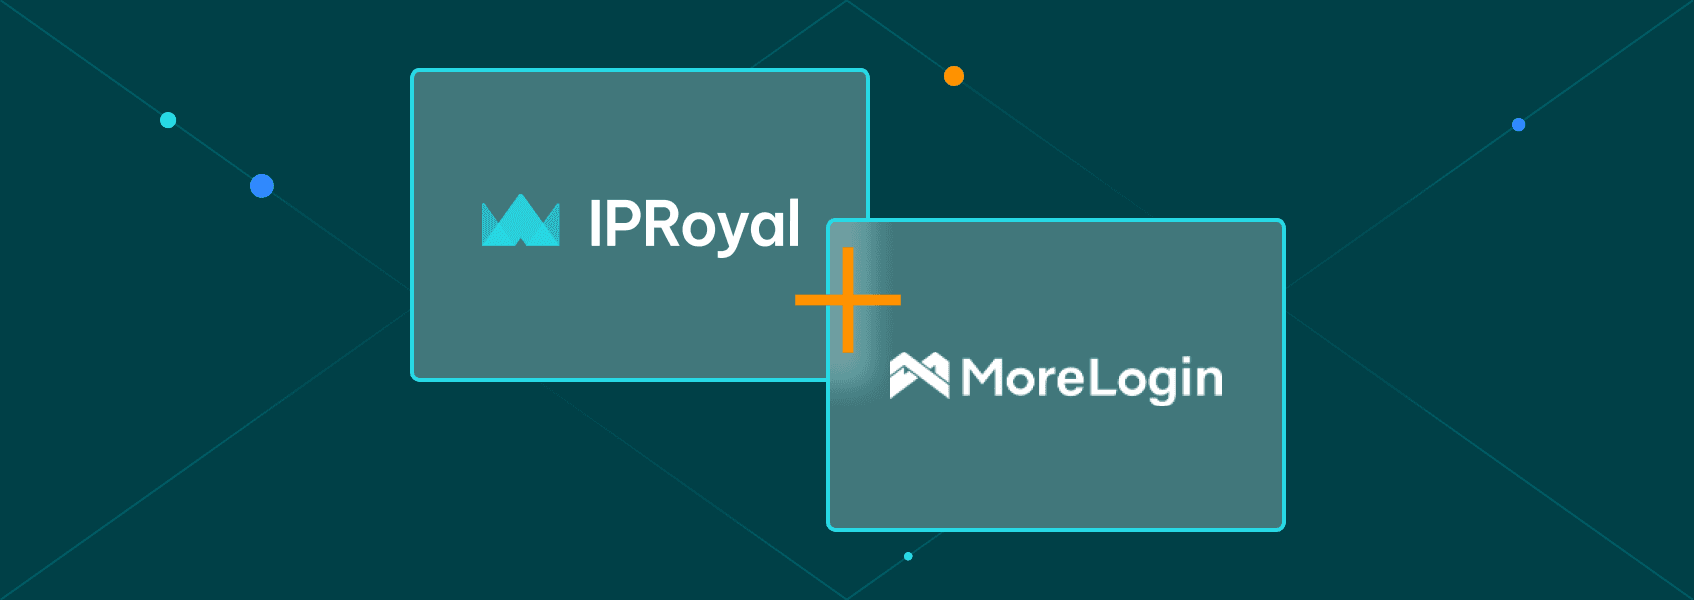 how to set up a morelogin proxy with iproyal featured